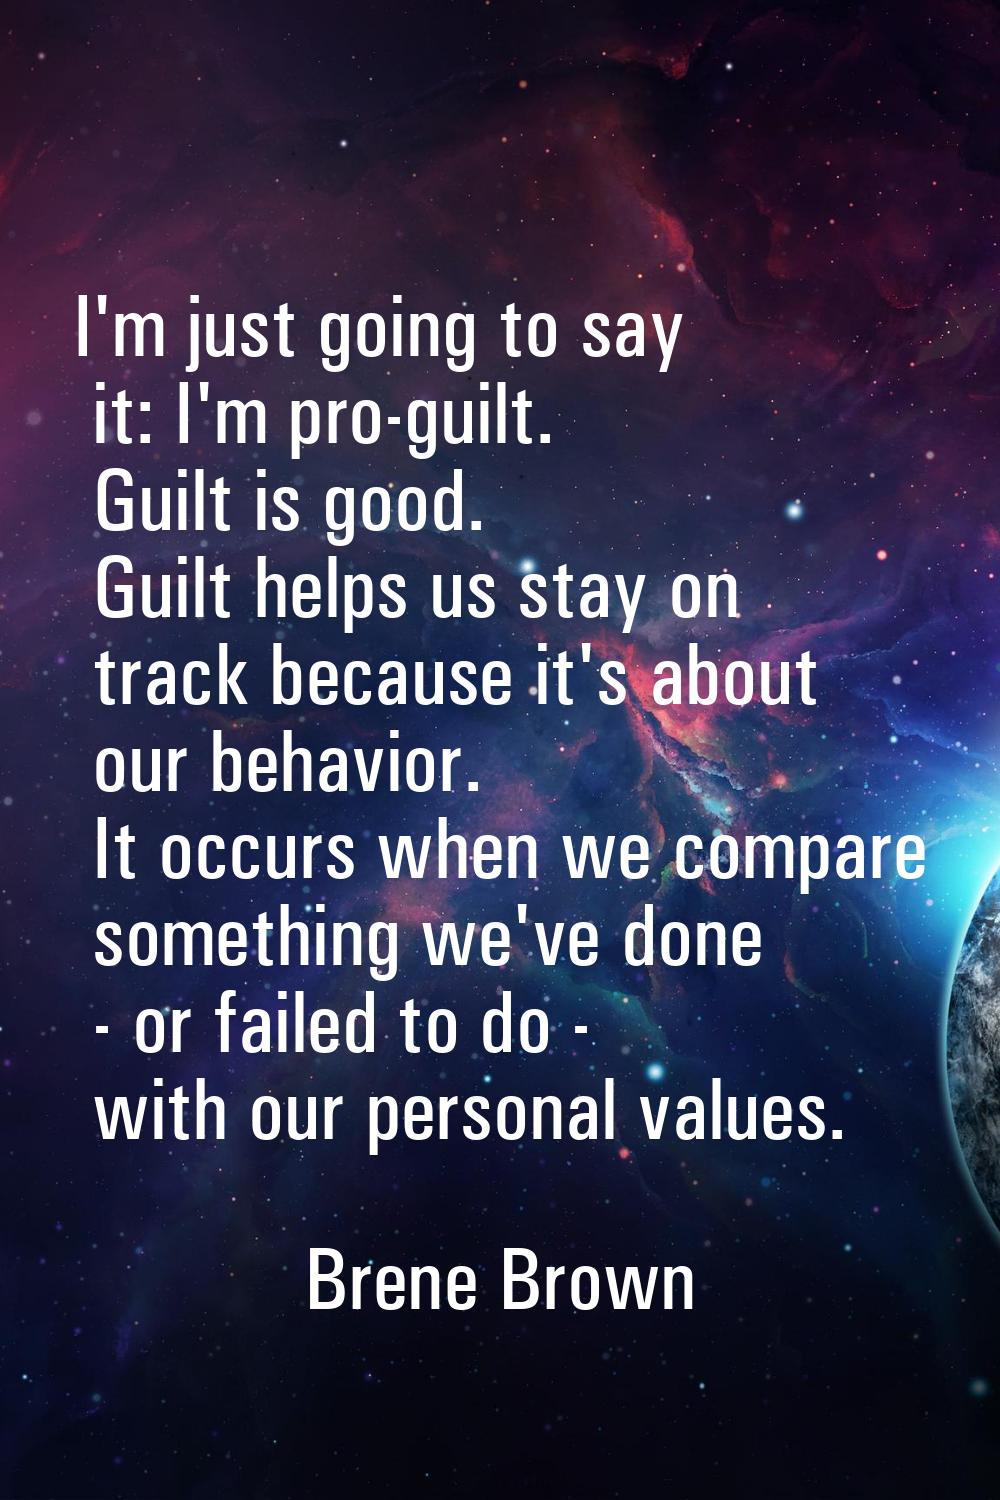 I'm just going to say it: I'm pro-guilt. Guilt is good. Guilt helps us stay on track because it's a